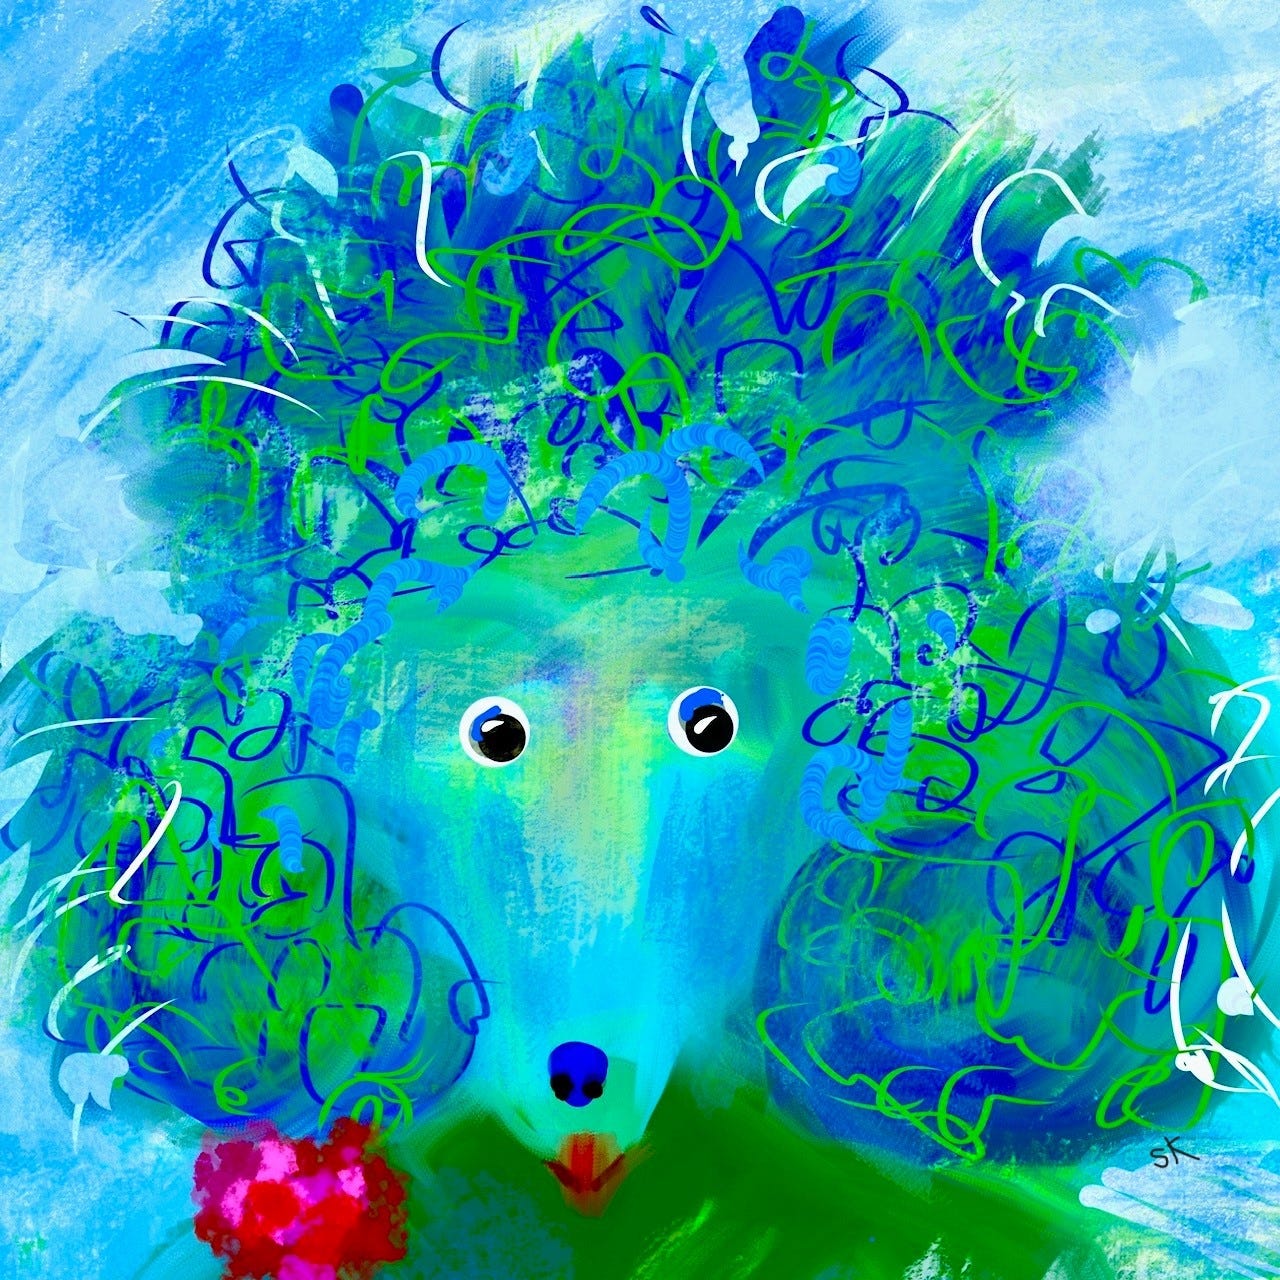 Whimsical painting by Sherry Killam Arts of a blue poodle dog with electrified curly hair and an anxious expression on its face.